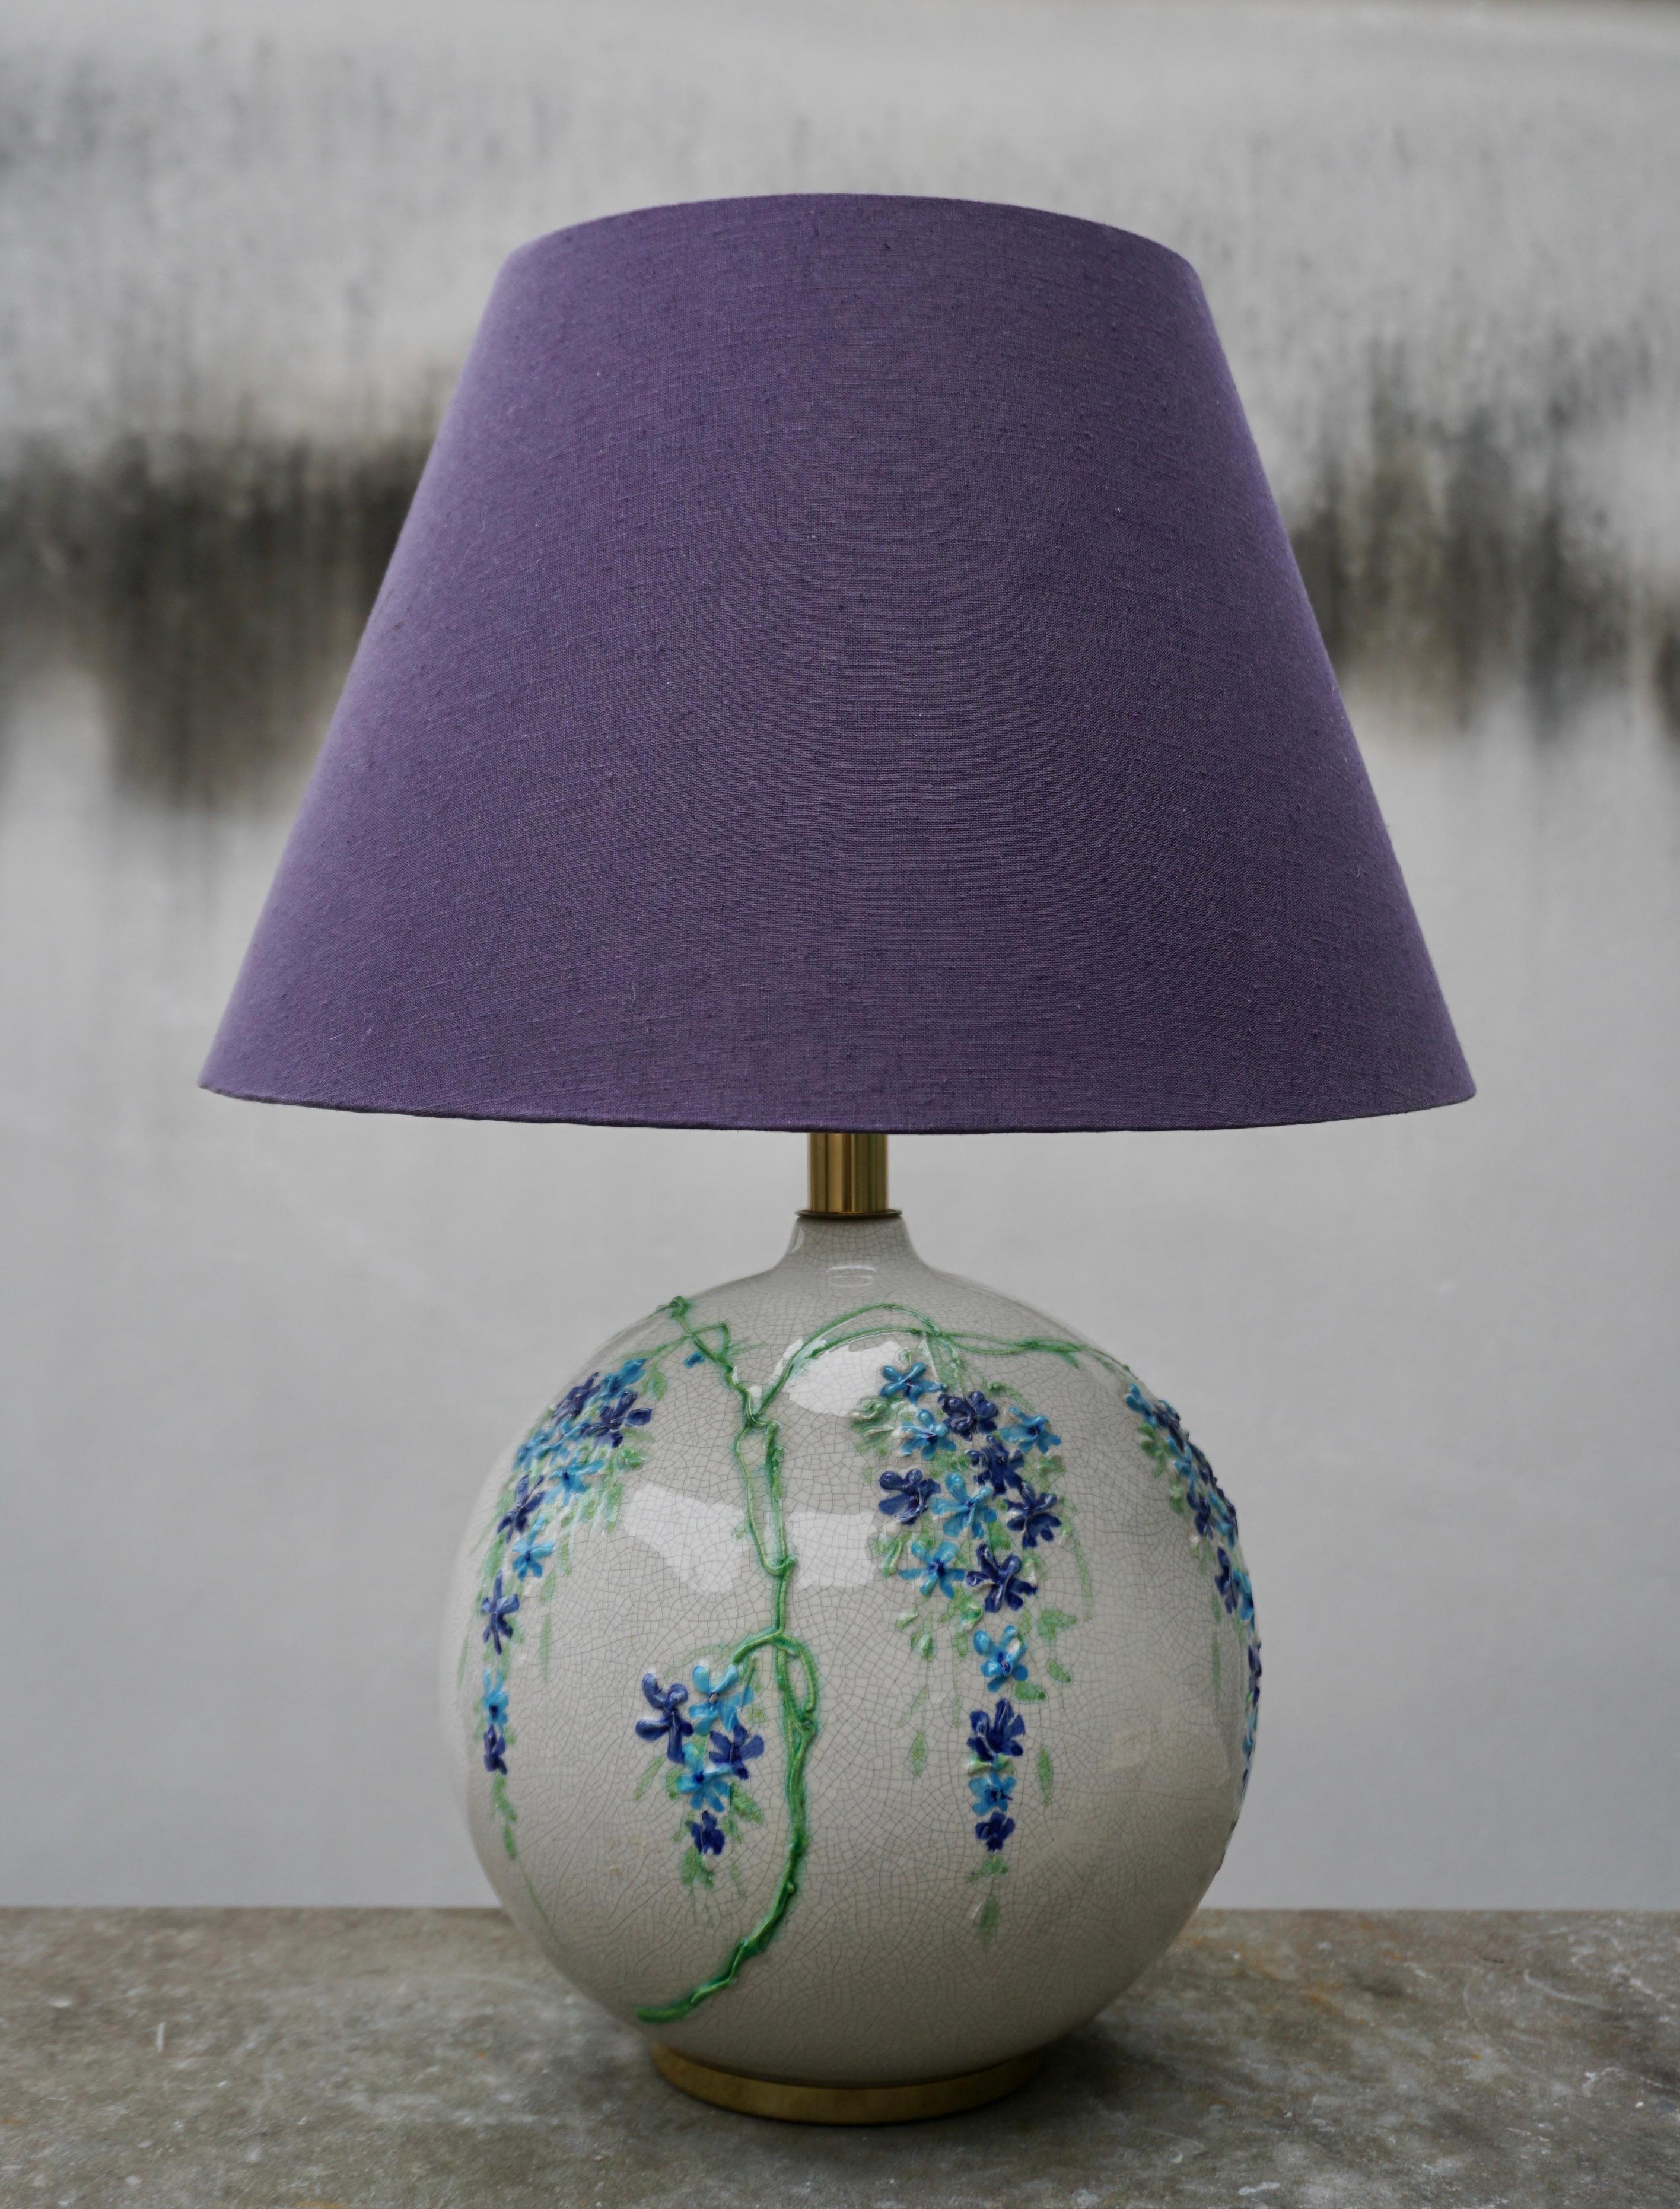 This elegant table lamp was designed by Alvino Bagni and produced by his company Bagni in Italy in the 1970s. The spherical shape in glazed ceramic was made entirely by hand on a lathe. New custom shade with linen texture in a purple blue color